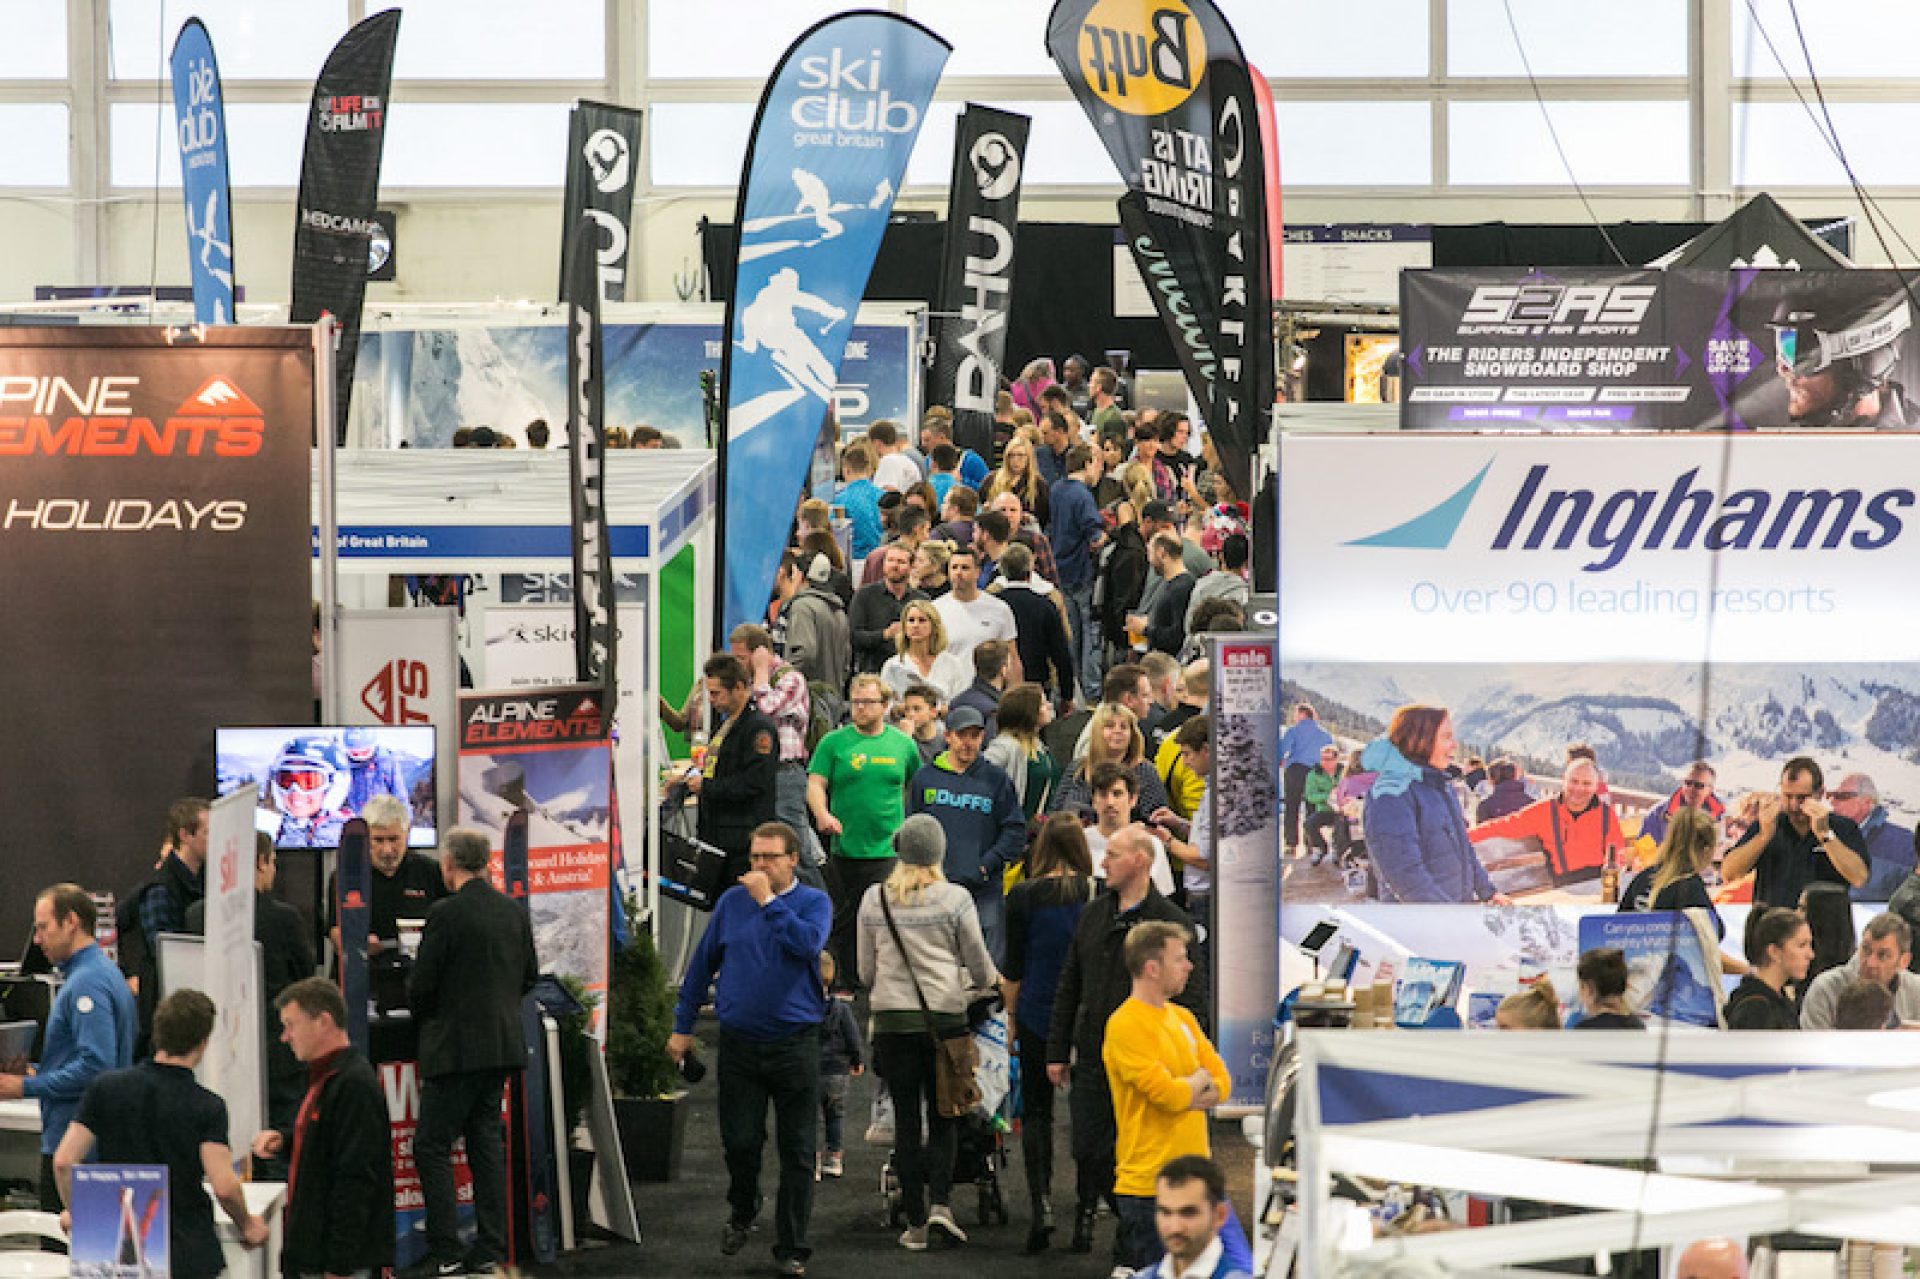 The Telegraph Ski Snowboard Show Returns To Battersea Park For within ski and snowboard show battersea 2017 for Found Property